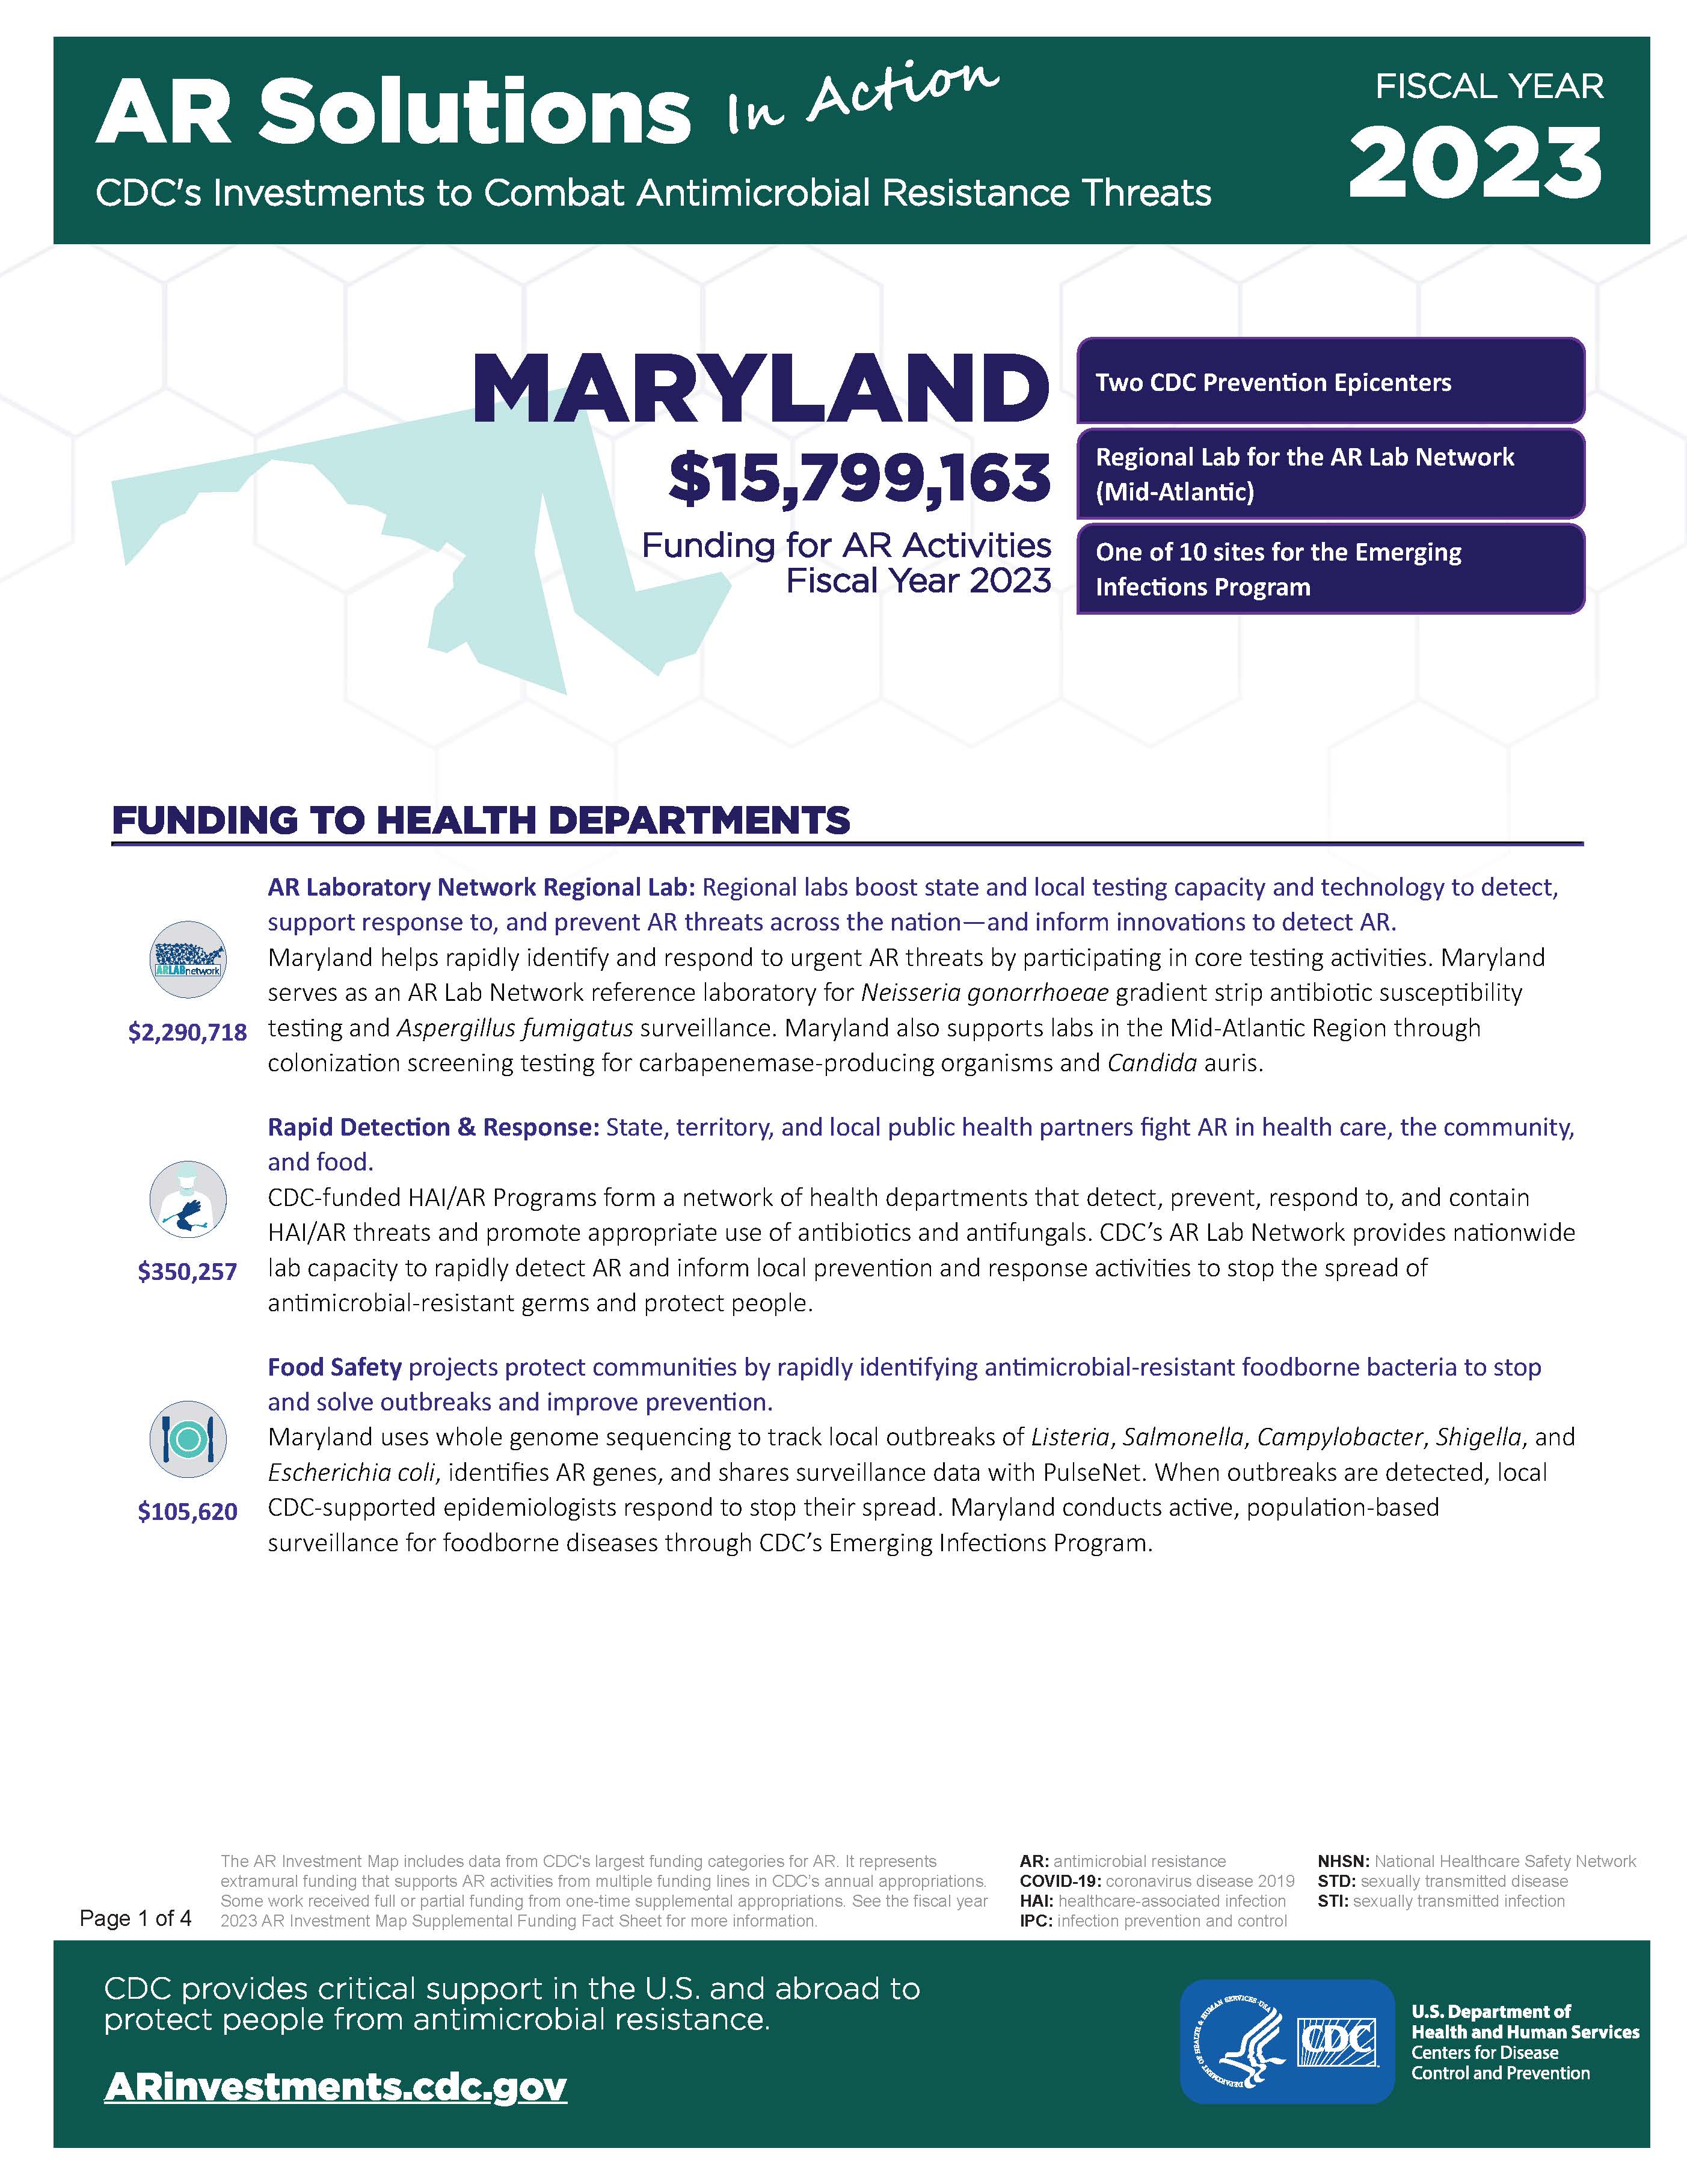 View Factsheet for Maryland